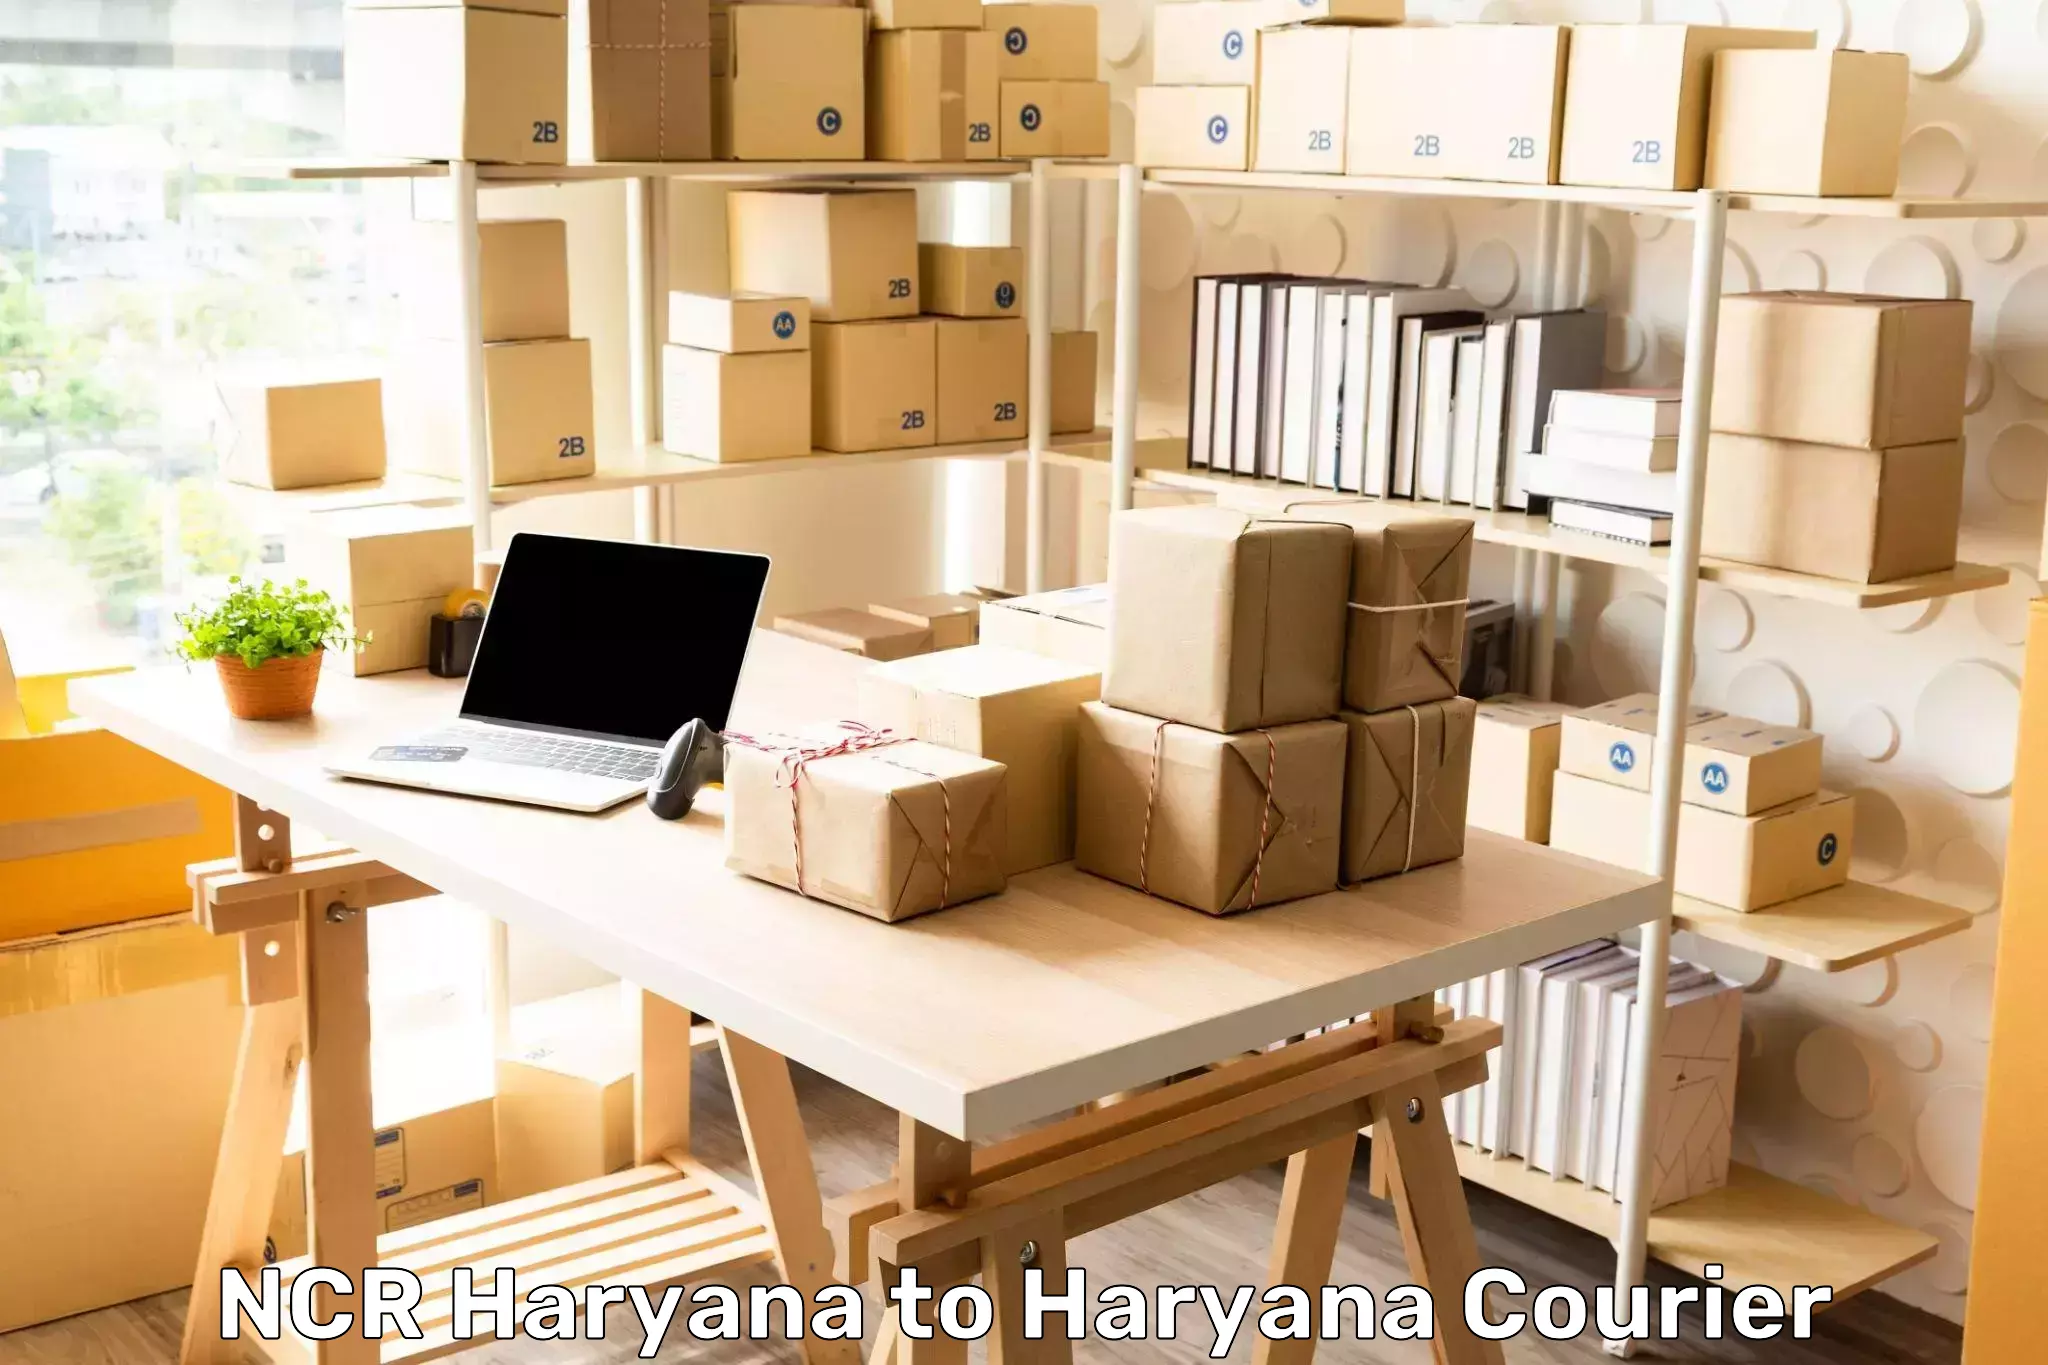 Reliable delivery network NCR Haryana to Faridabad